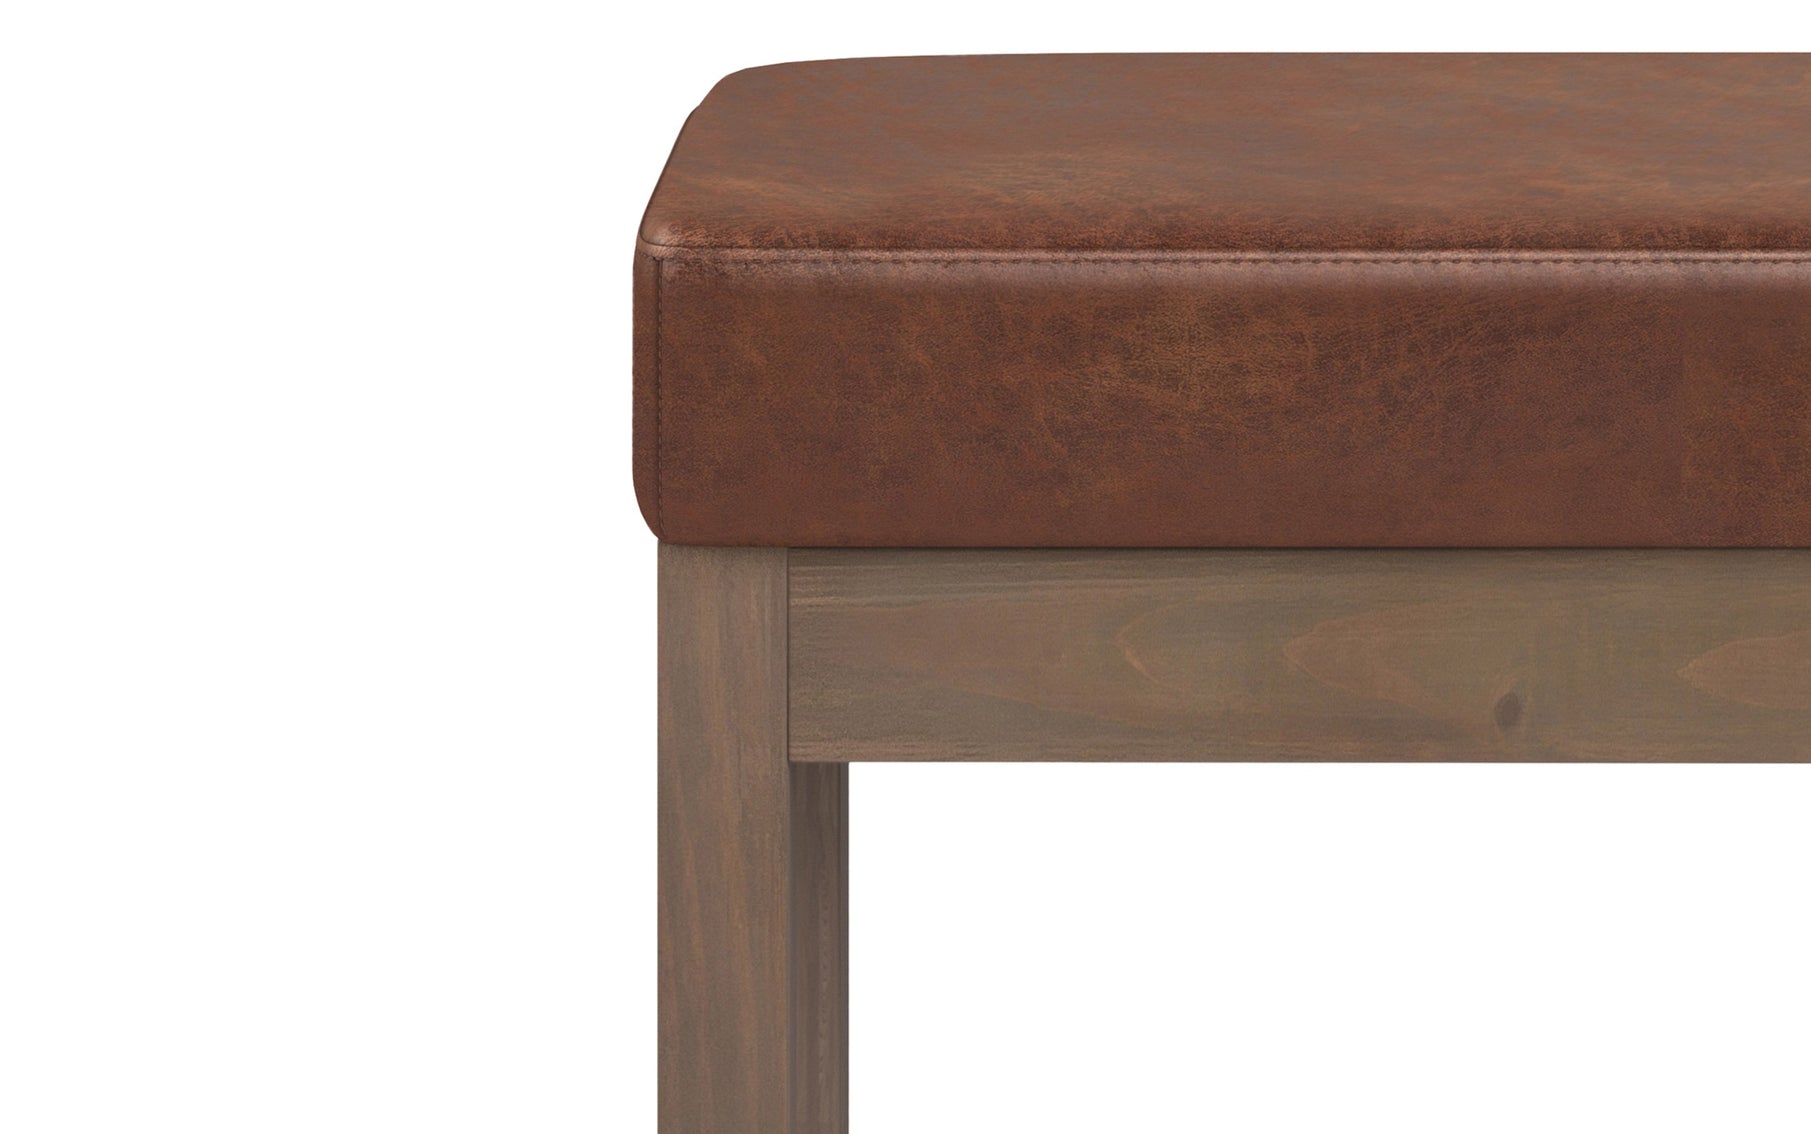 Distressed Saddle Brown Distressed Vegan Leather | Milltown Footstool Small Ottoman Bench